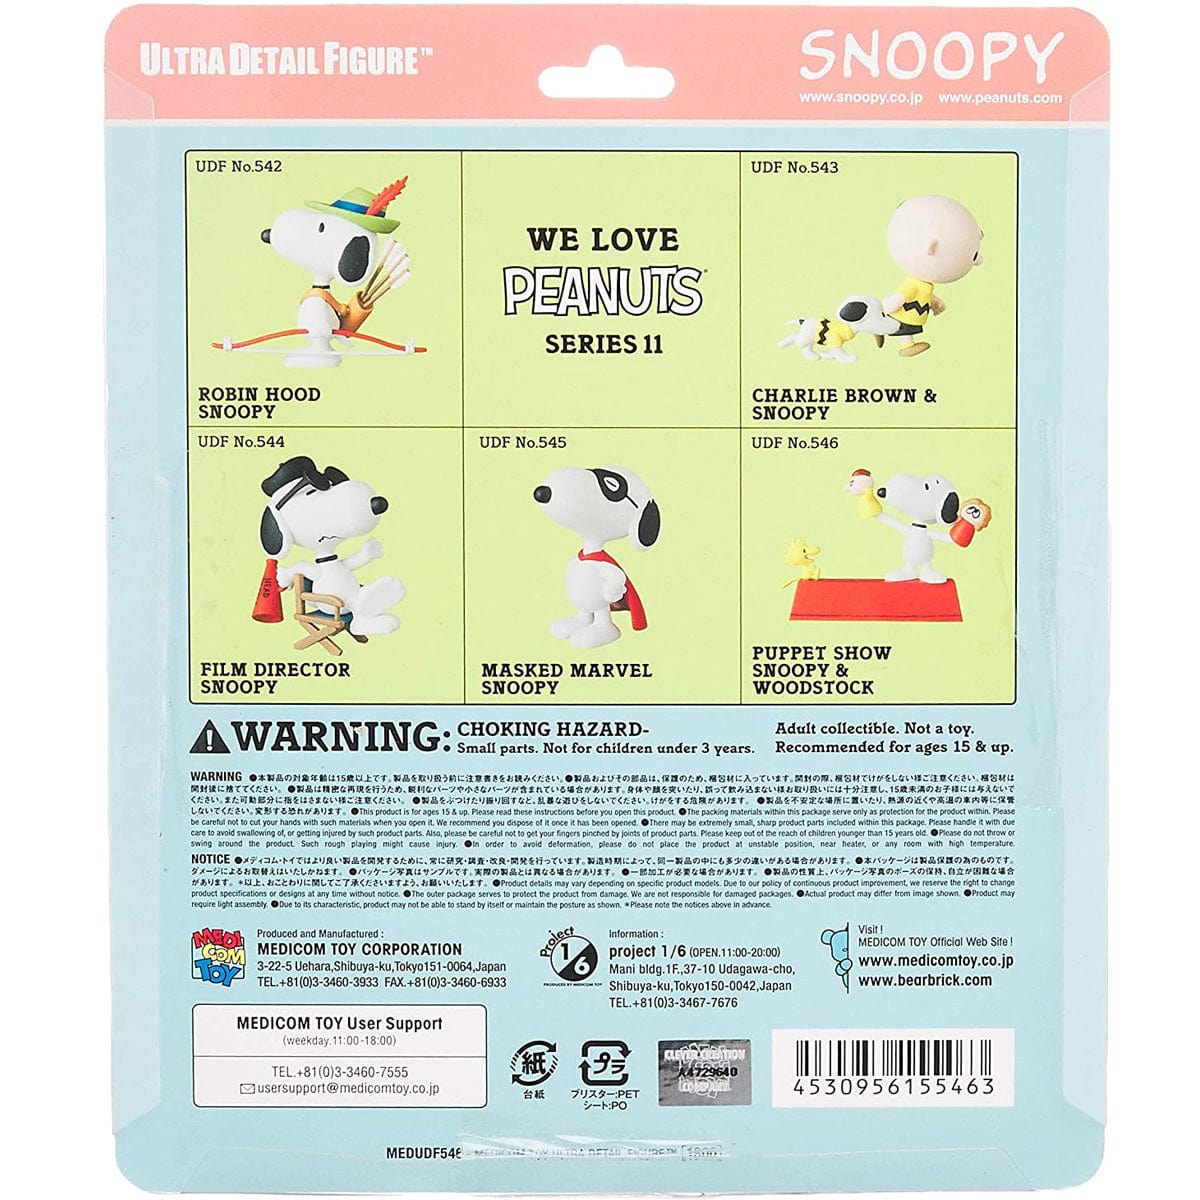 7.5 Peanuts Puppet Snoopy and Woodstock UDF Figures